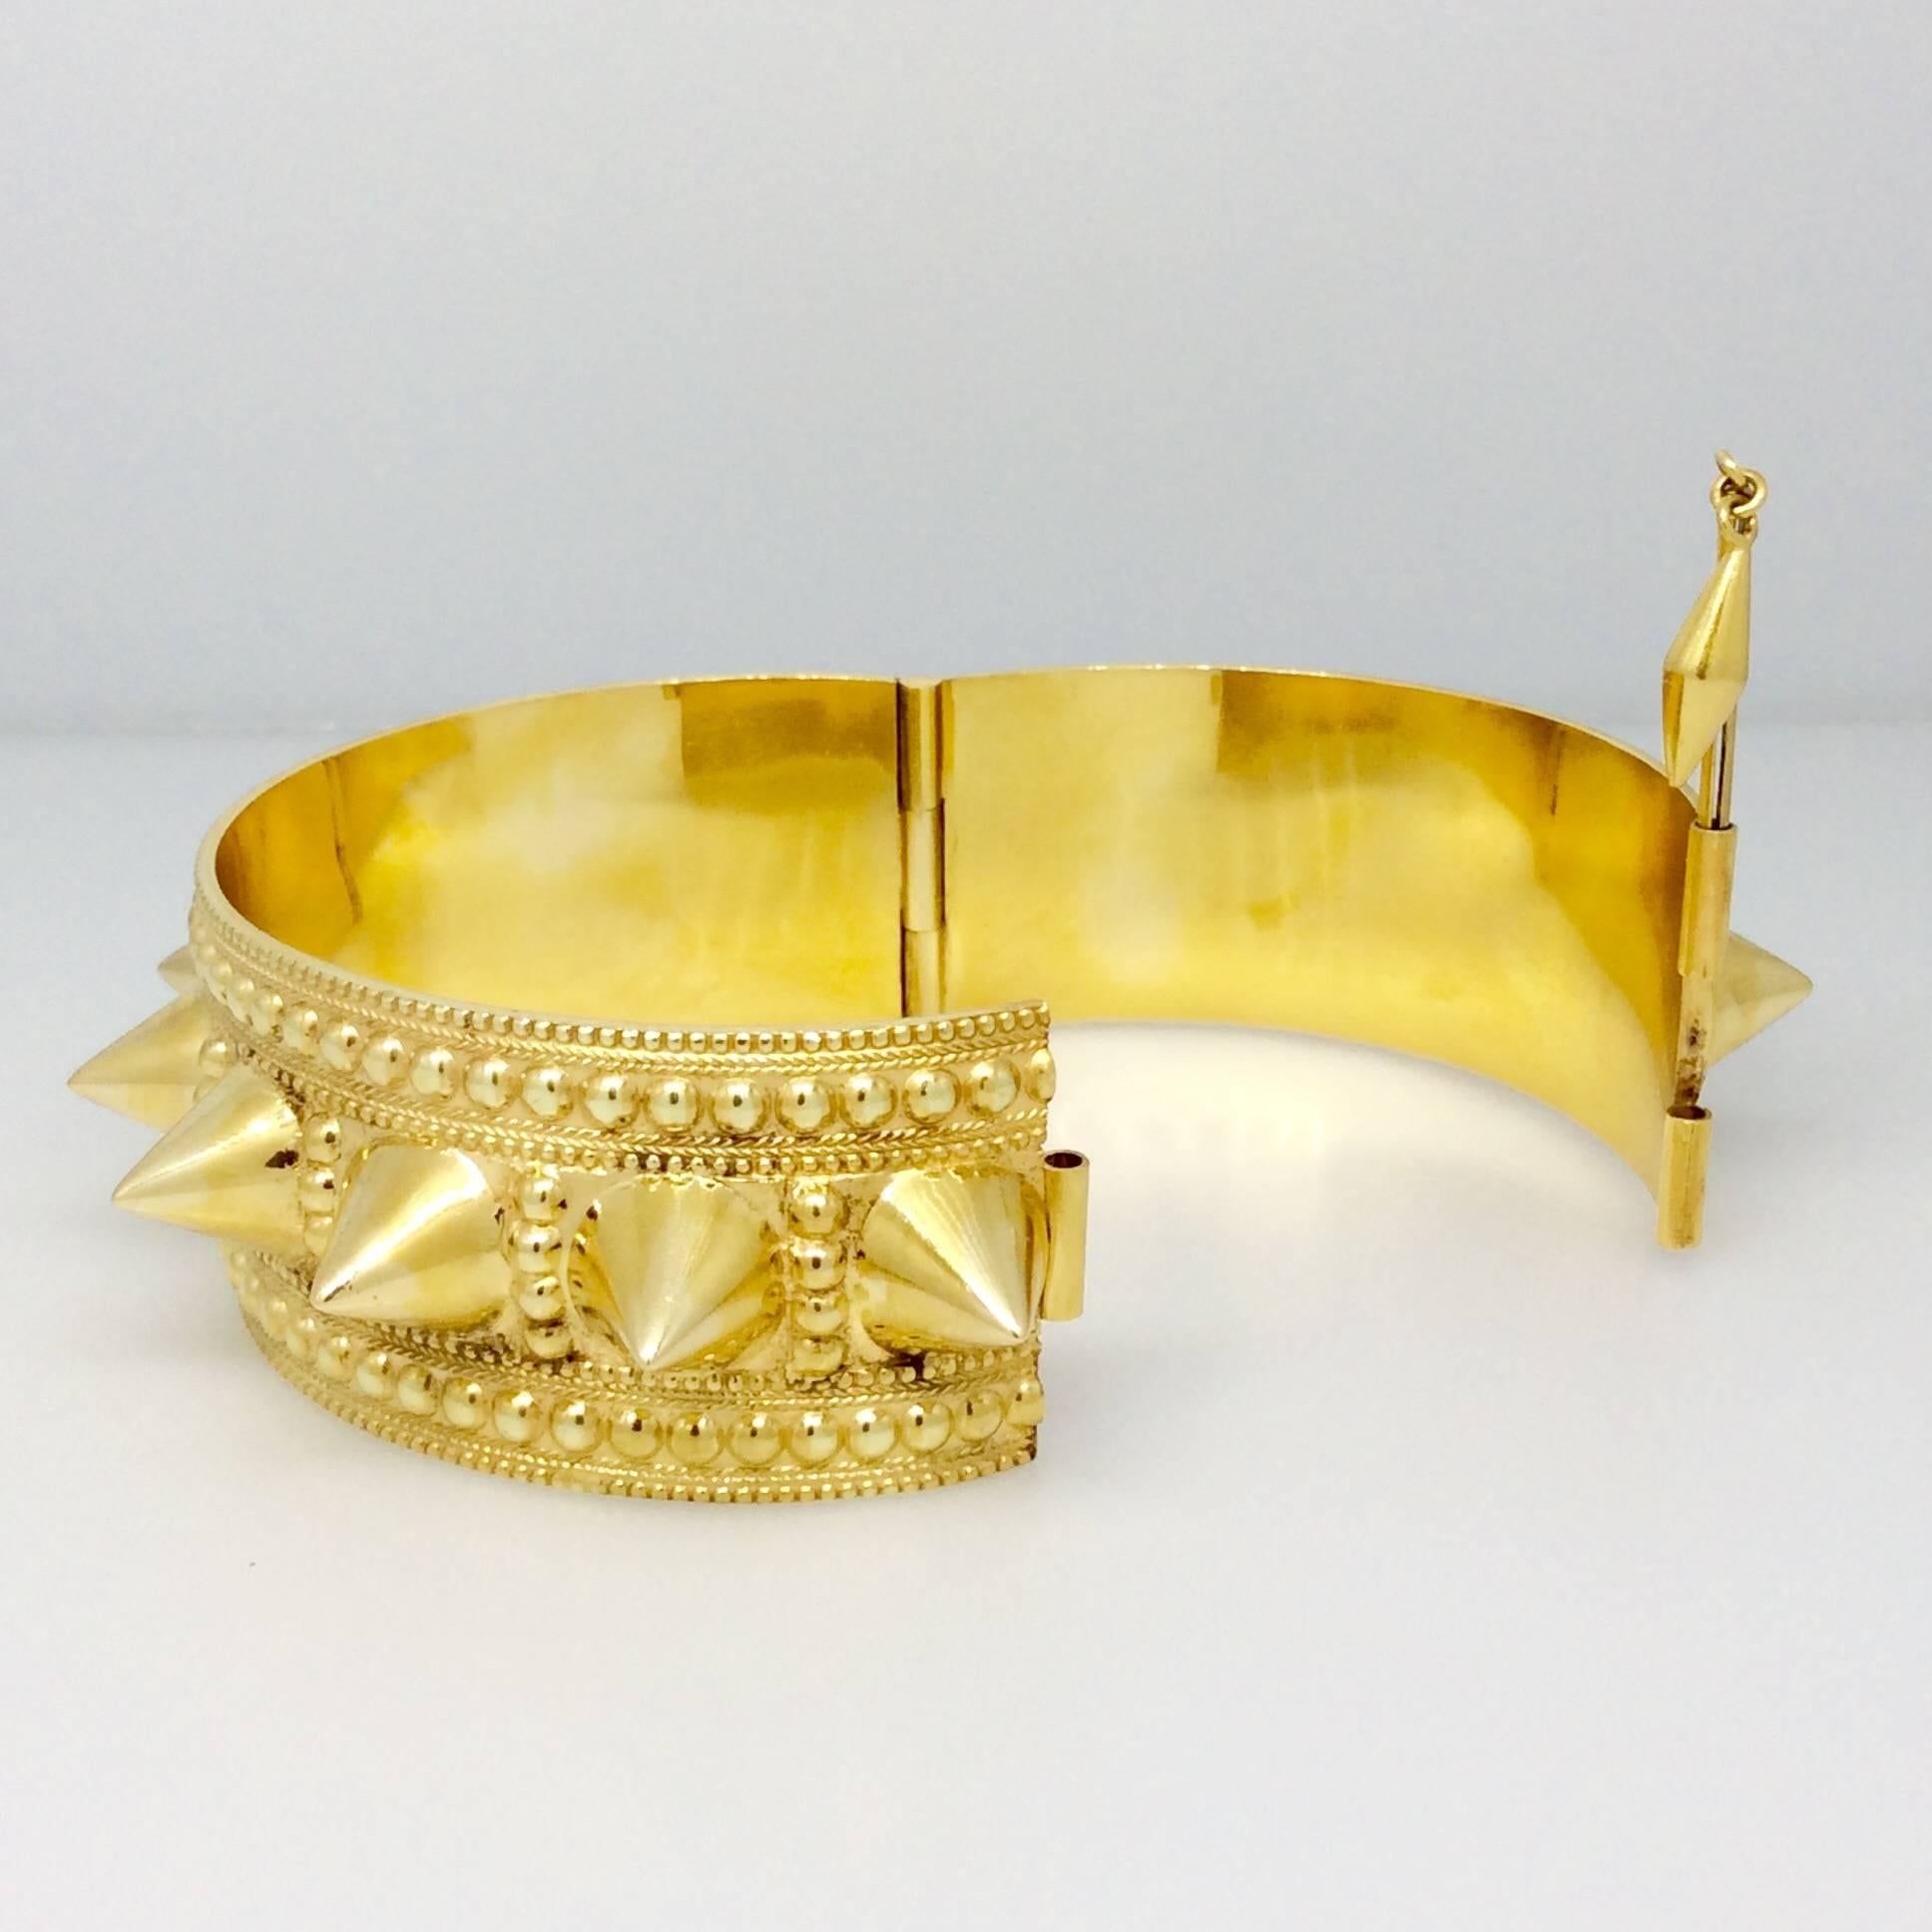 Wide Spiked Gold Cuff Bangle Bracelet In Excellent Condition For Sale In La Jolla, CA